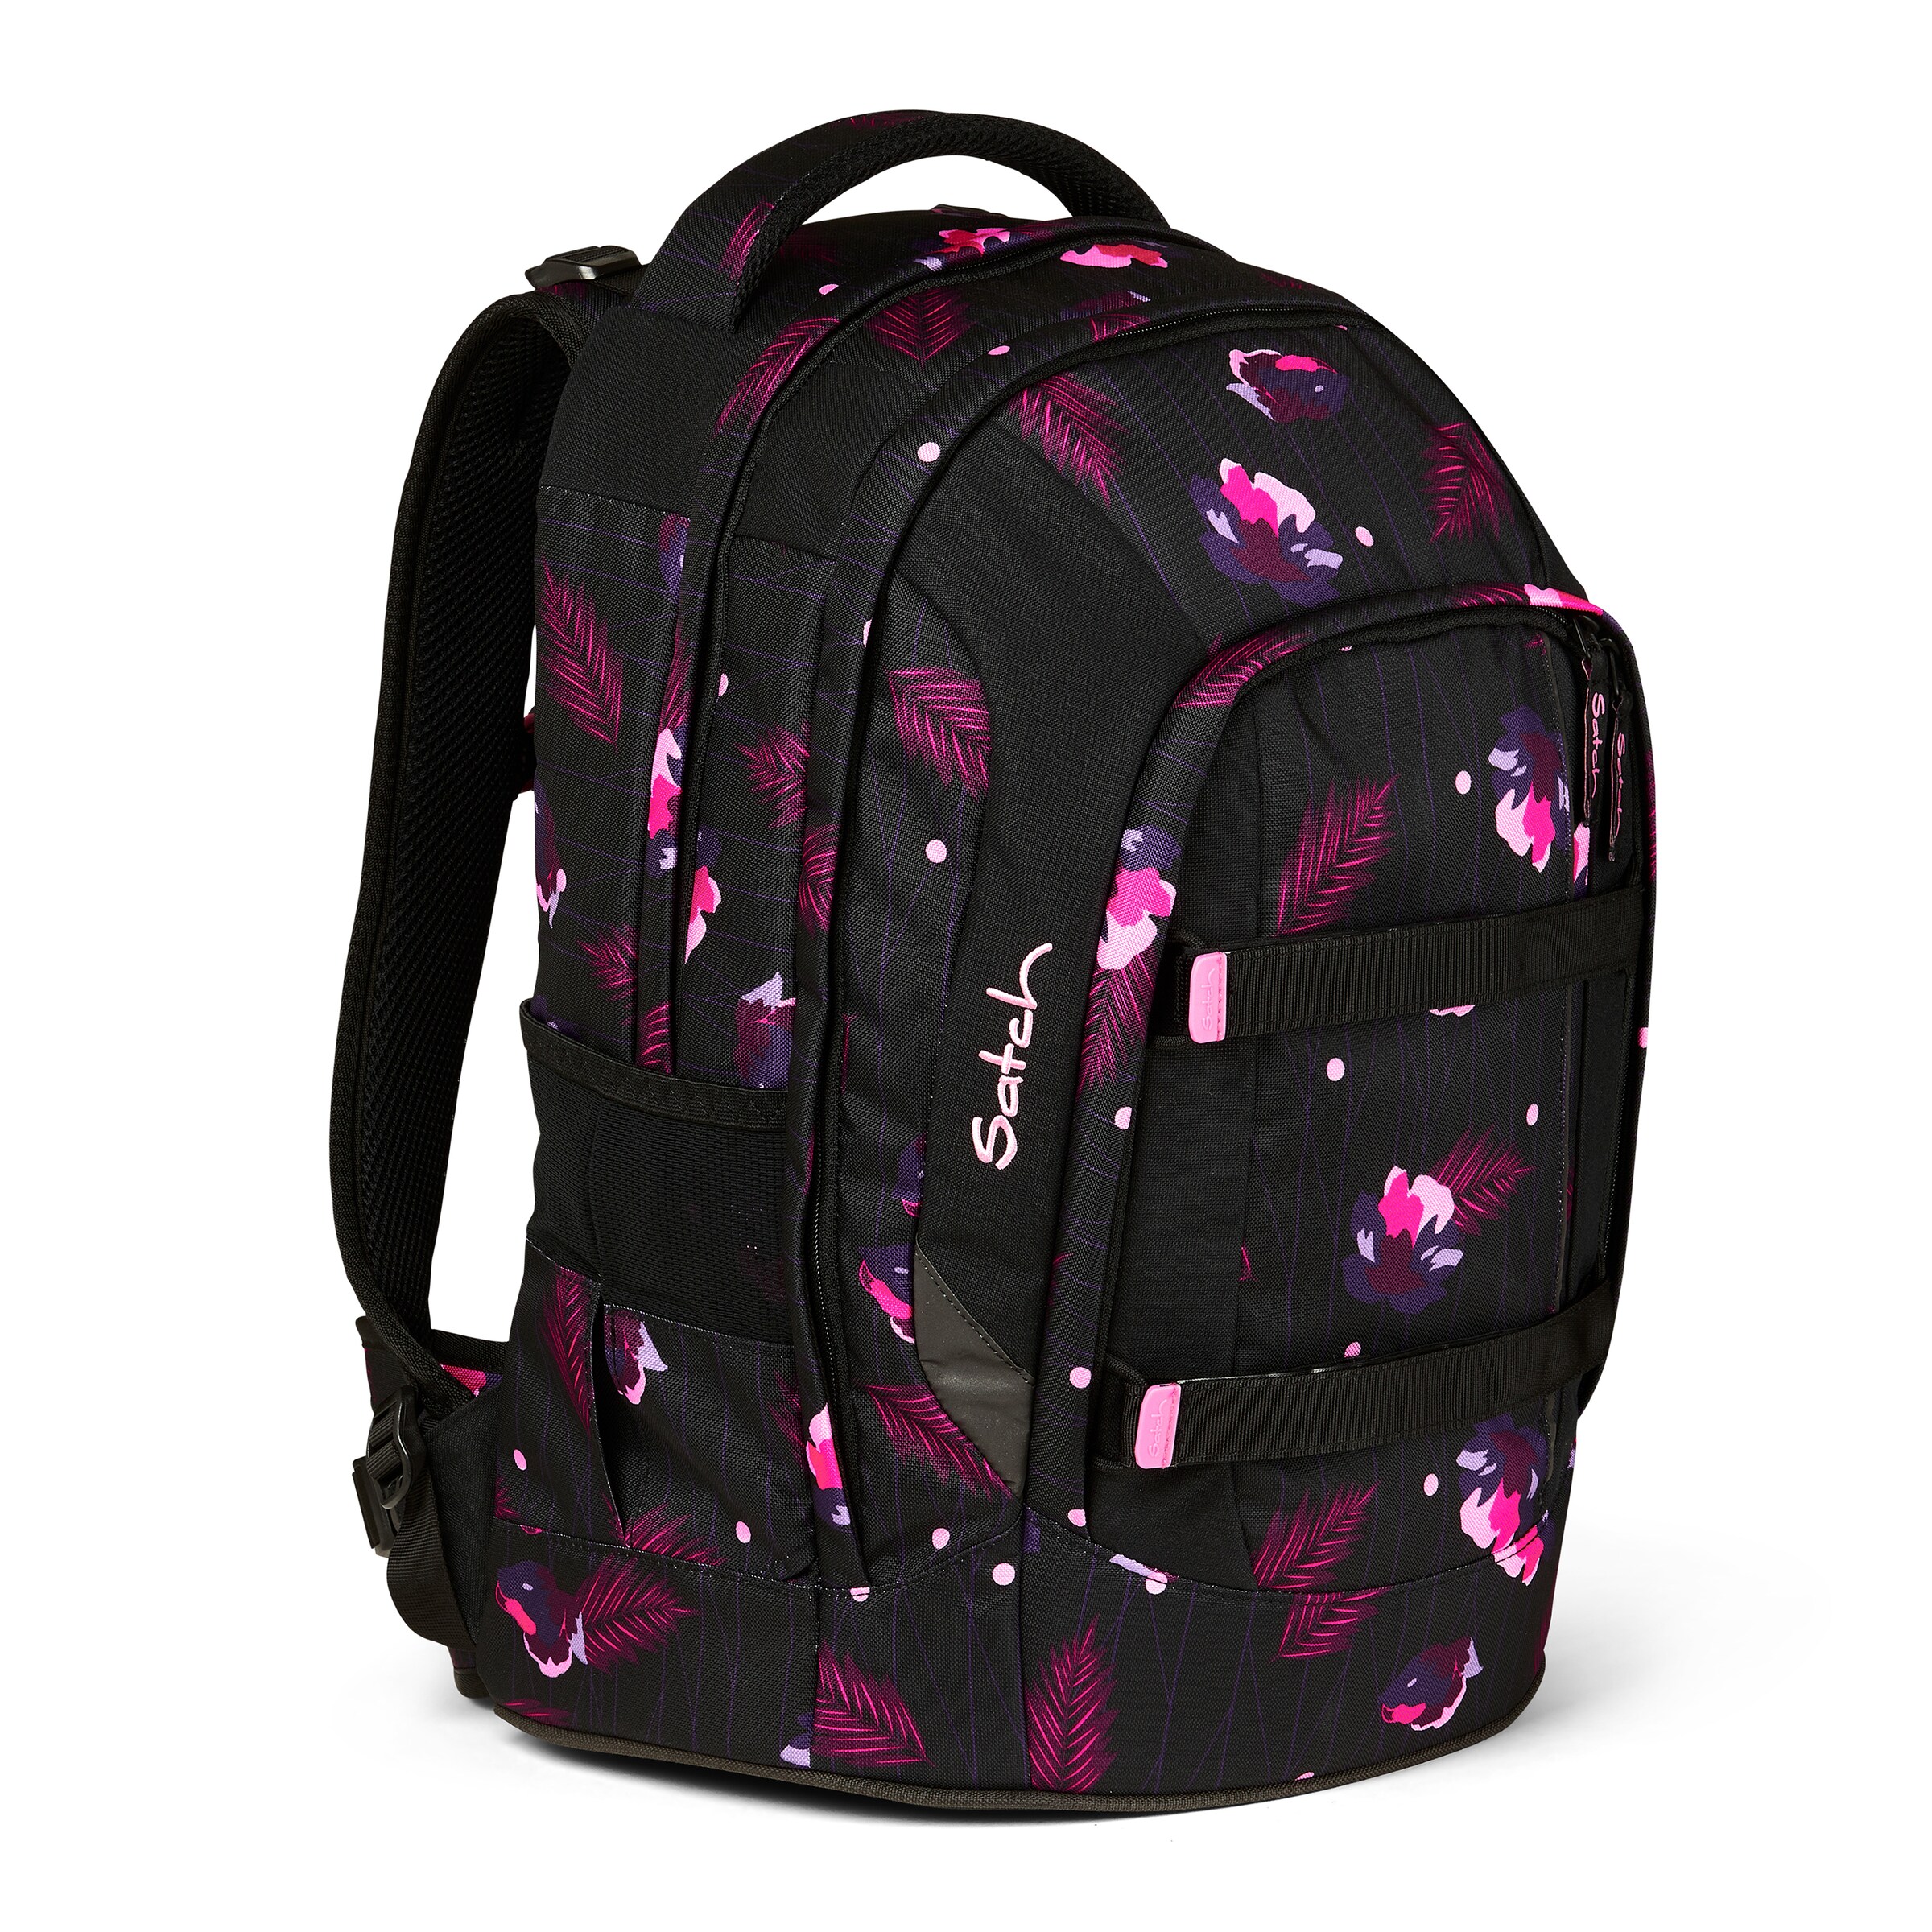 satch schoolbags, backpacks, pencil cases and more